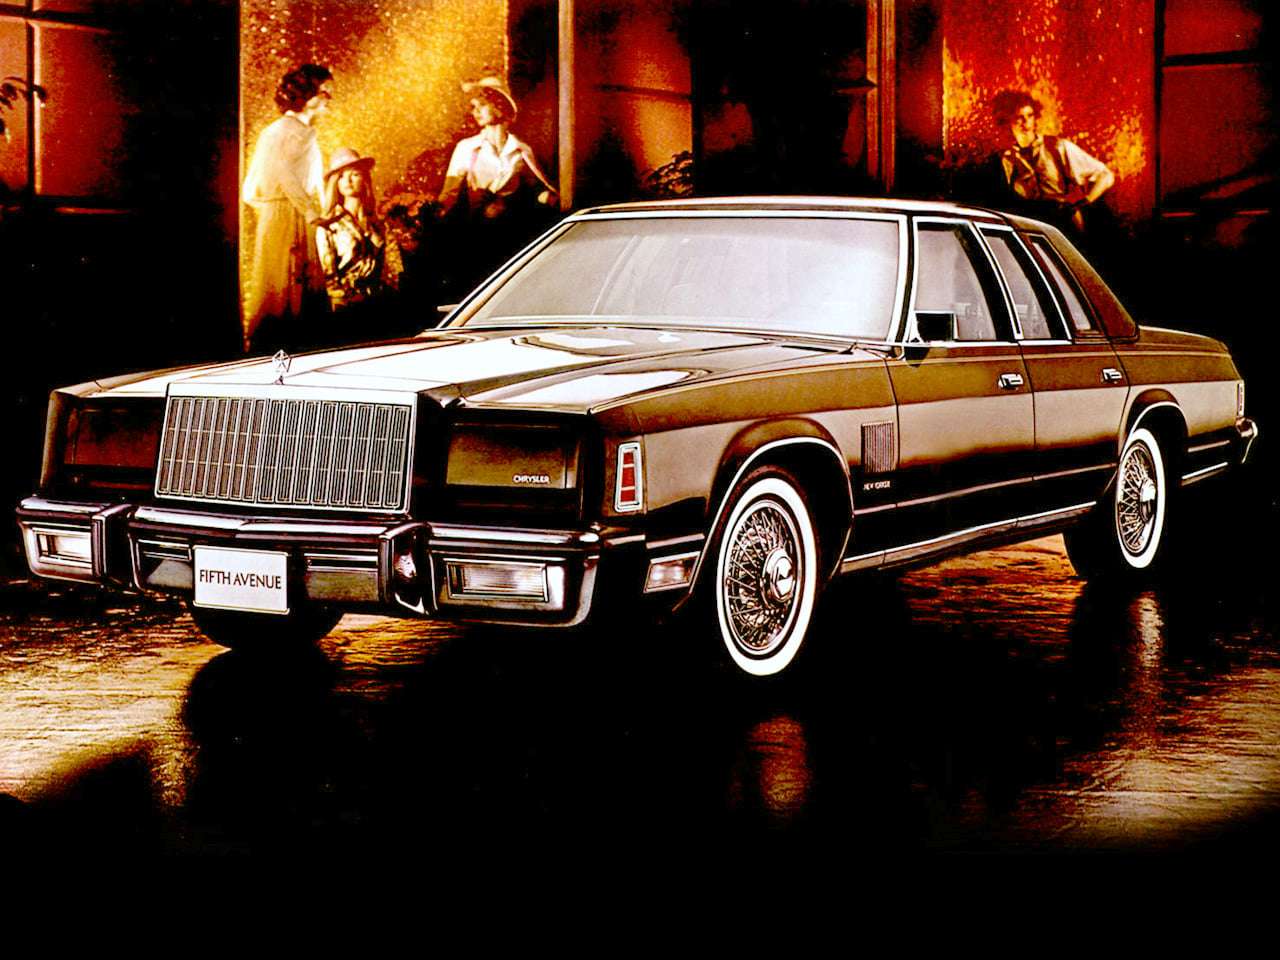 1980 Chrysler New Yorker Fifth Avenue jigsaw puzzle online